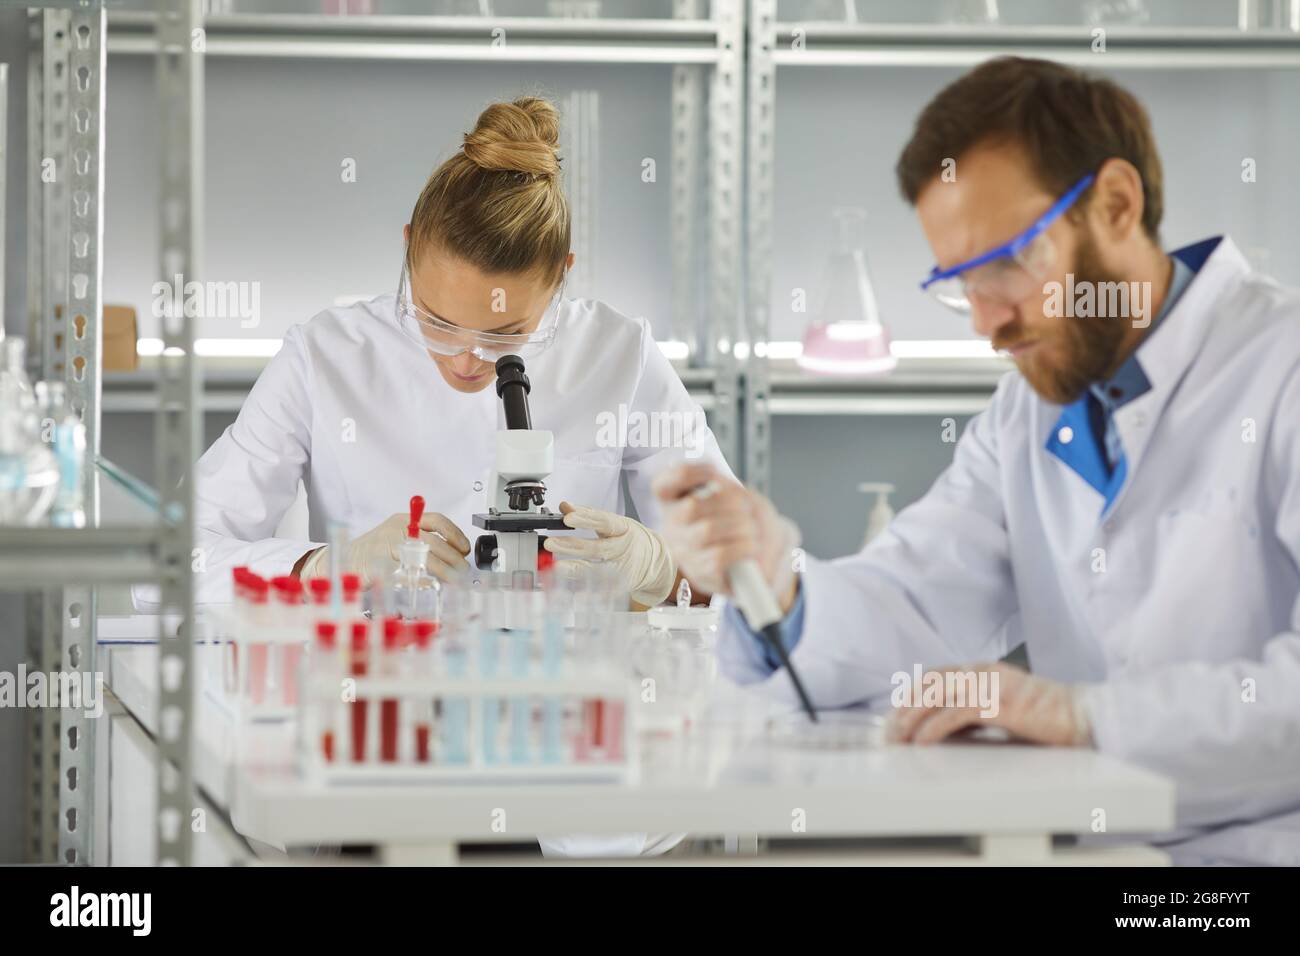 Health researchers diverse team working in biological science laboratory Stock Photo